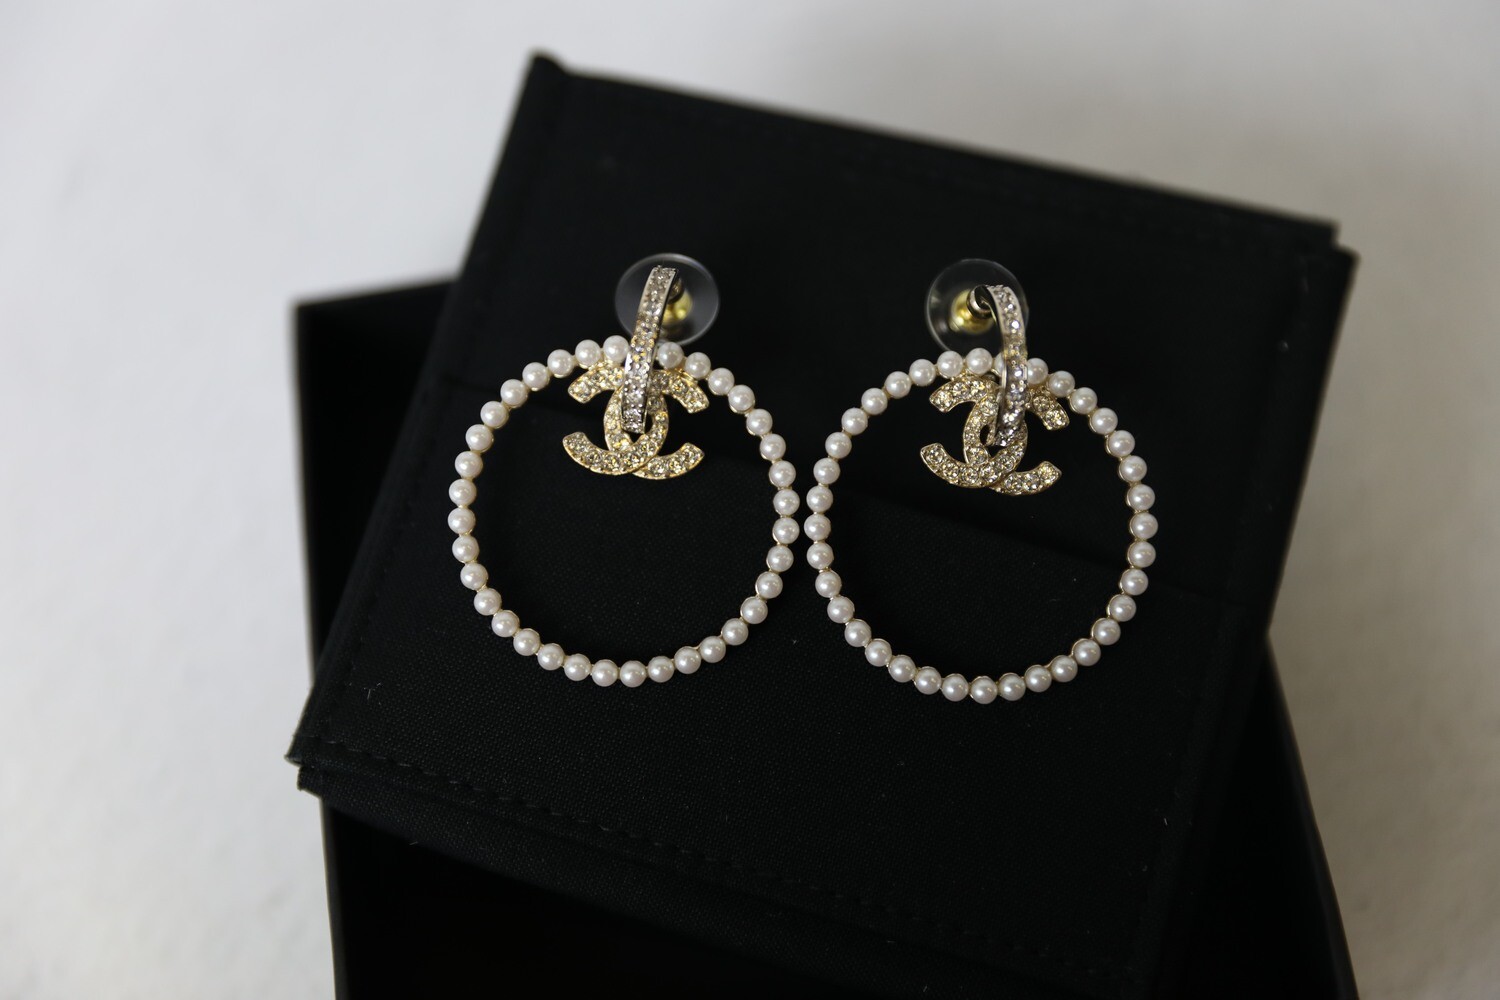 Chanel Earrings CC Crystal Drop Earrings with Pearl, Lightgold Hardware,  New in Box WA001